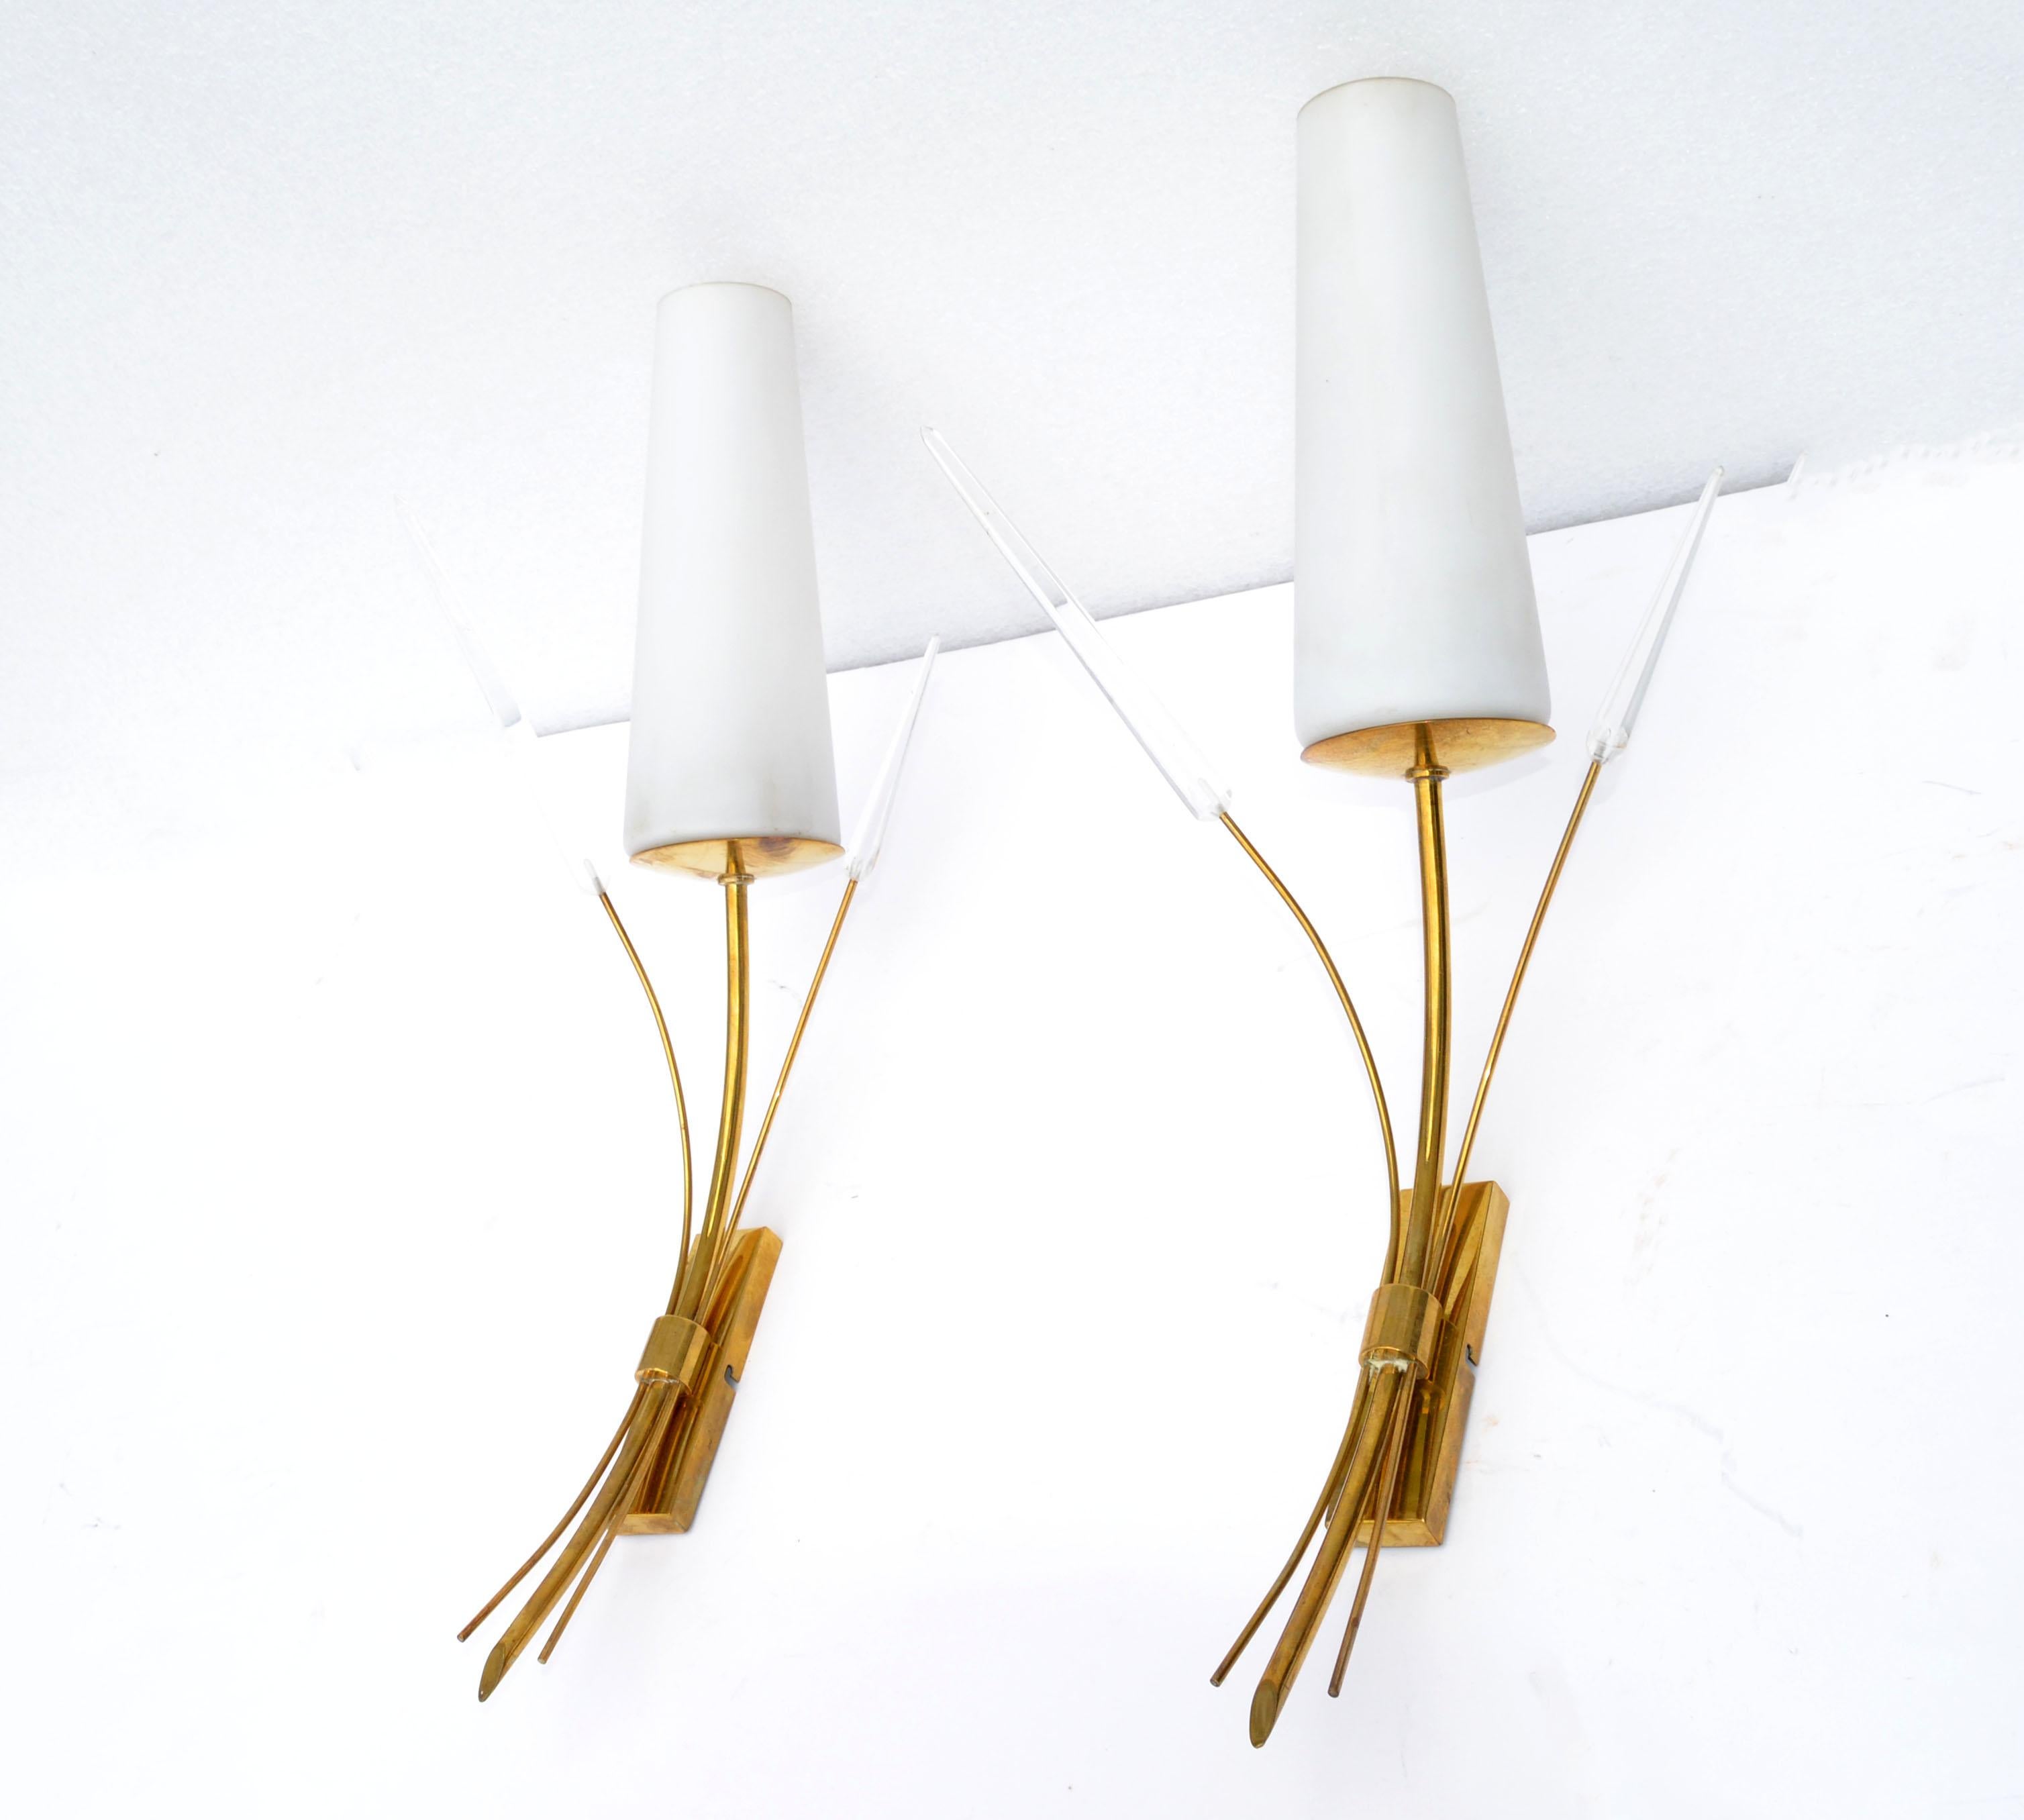 French Maison Lunel Sconce Lucite Brass & Opaline Shade France Mid-Century Modern, Pair